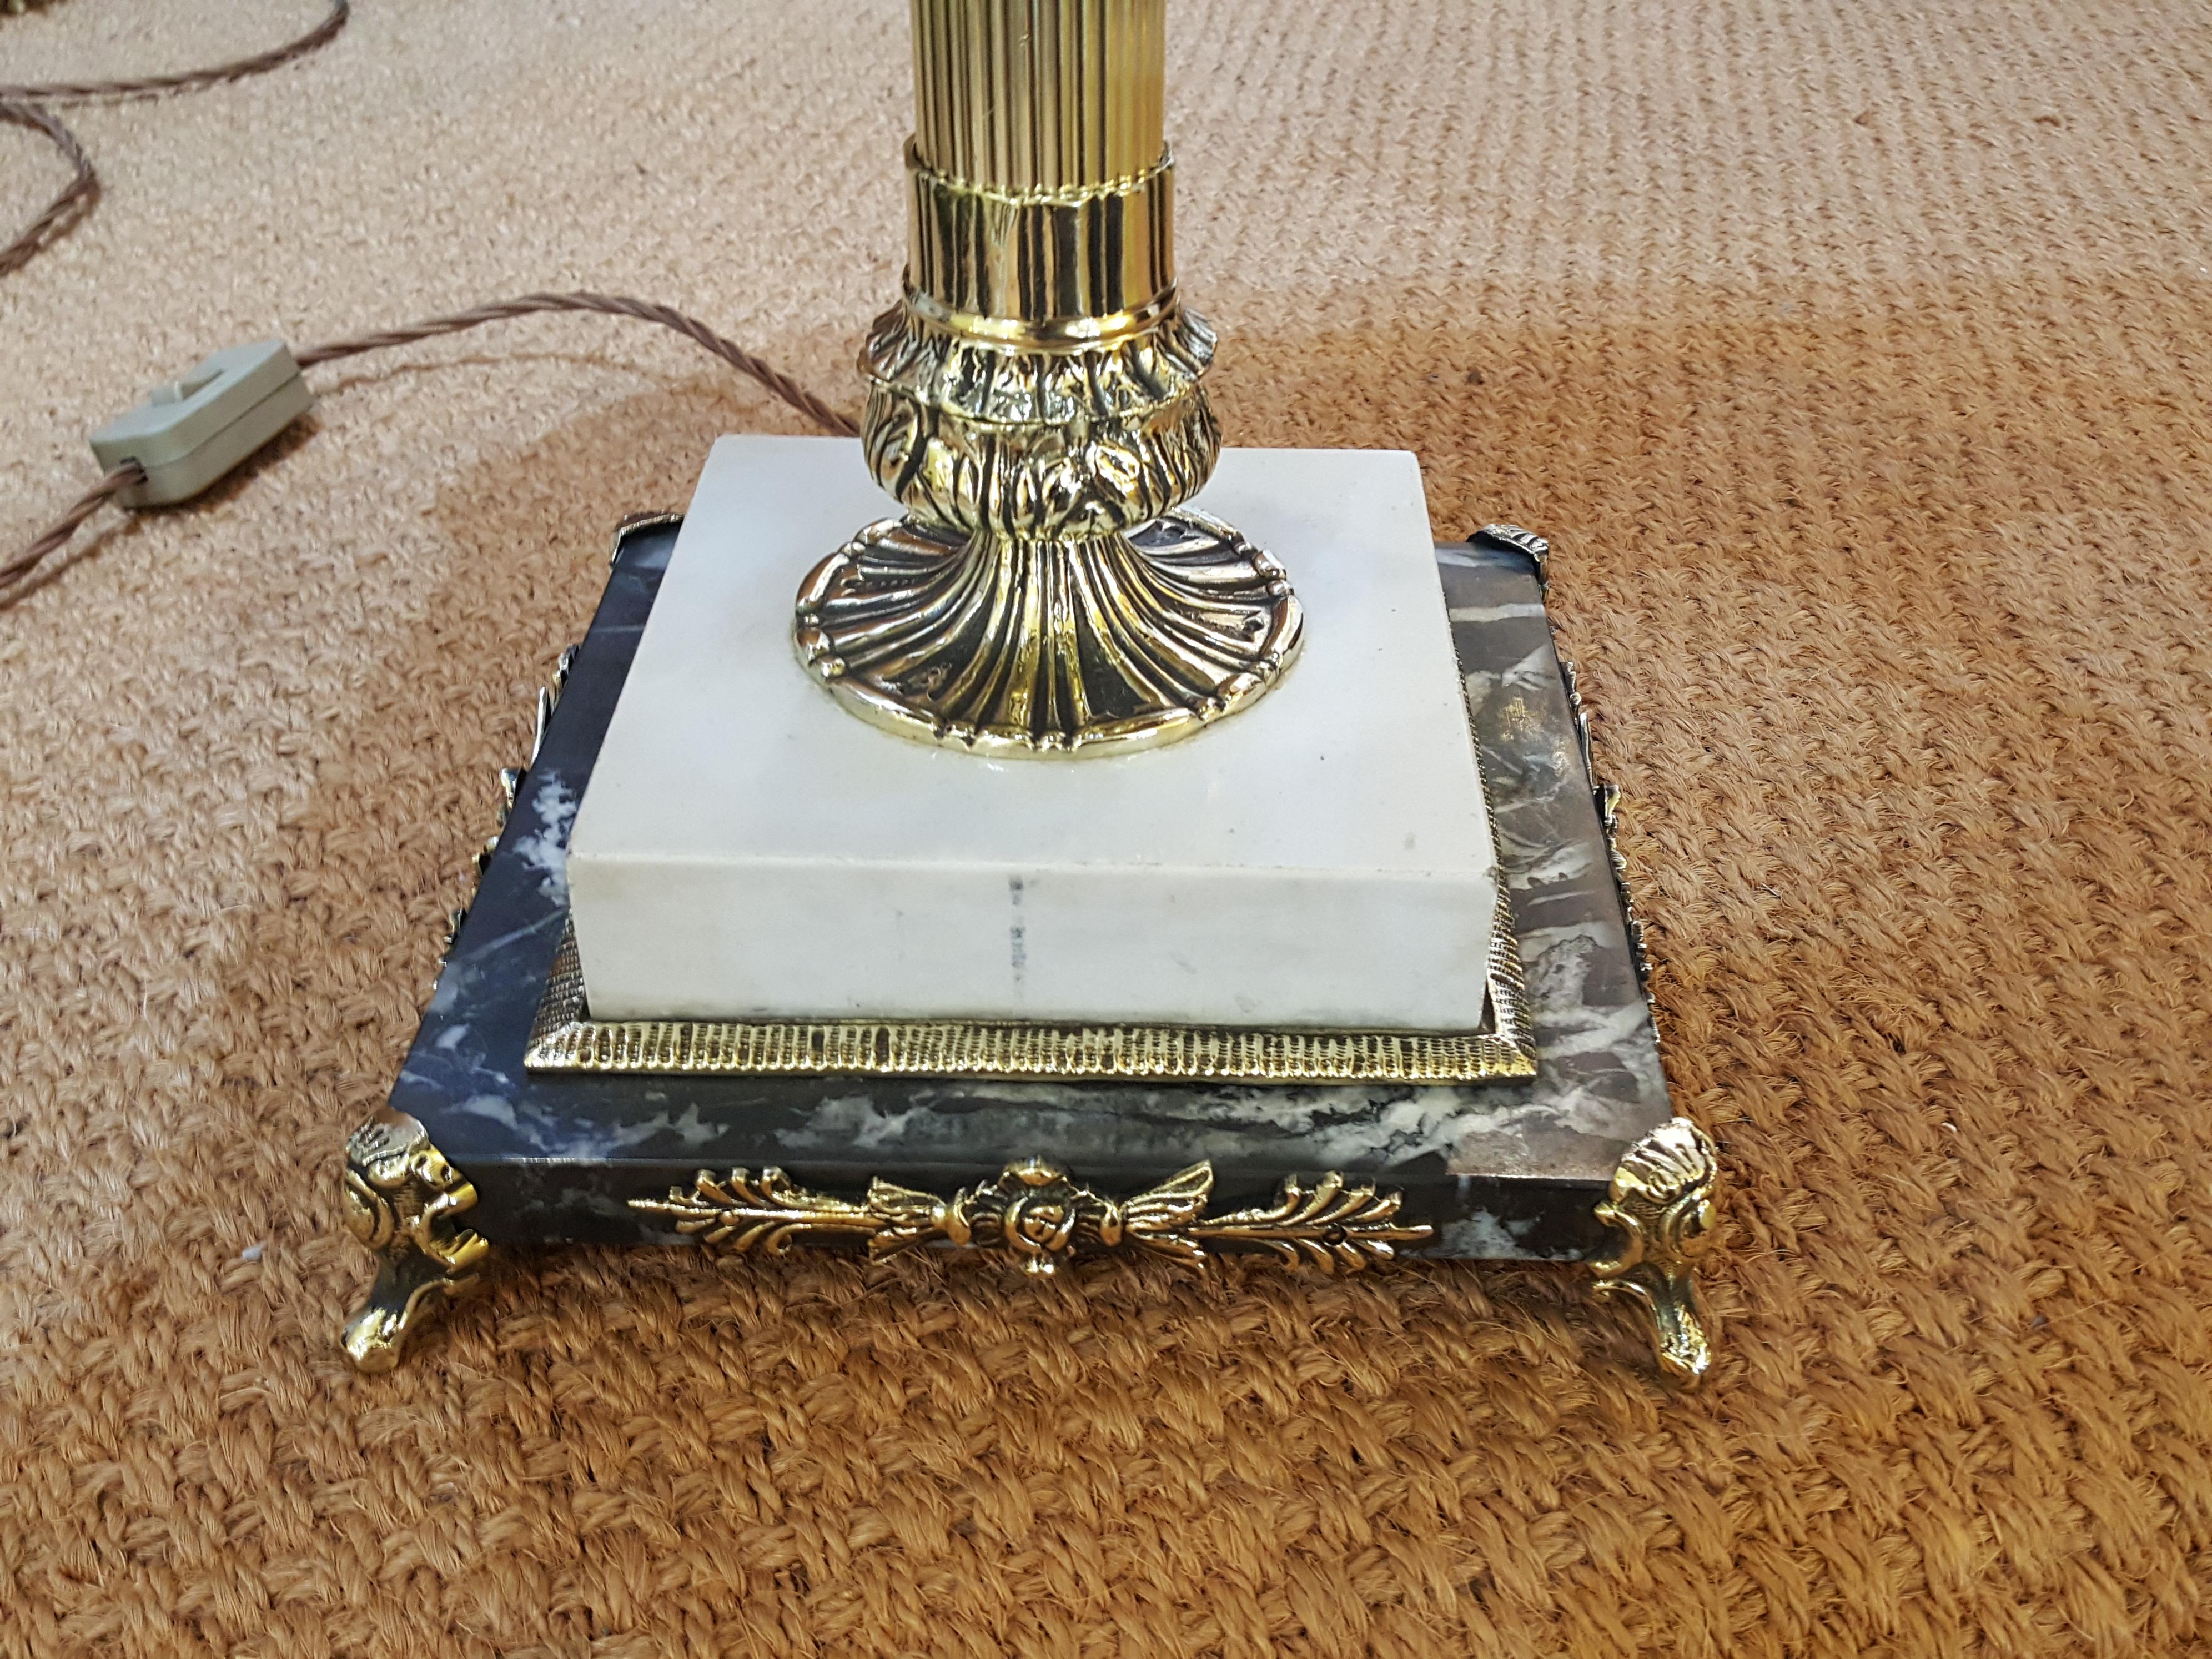 Late Victorian brass table oil lamp, in neoclassical style, as a fluted column on a stepped white and grey marble base with mask and scroll feet, converted to electricity, the lampshade(s) are newly handmade silks by the same maker as provides the